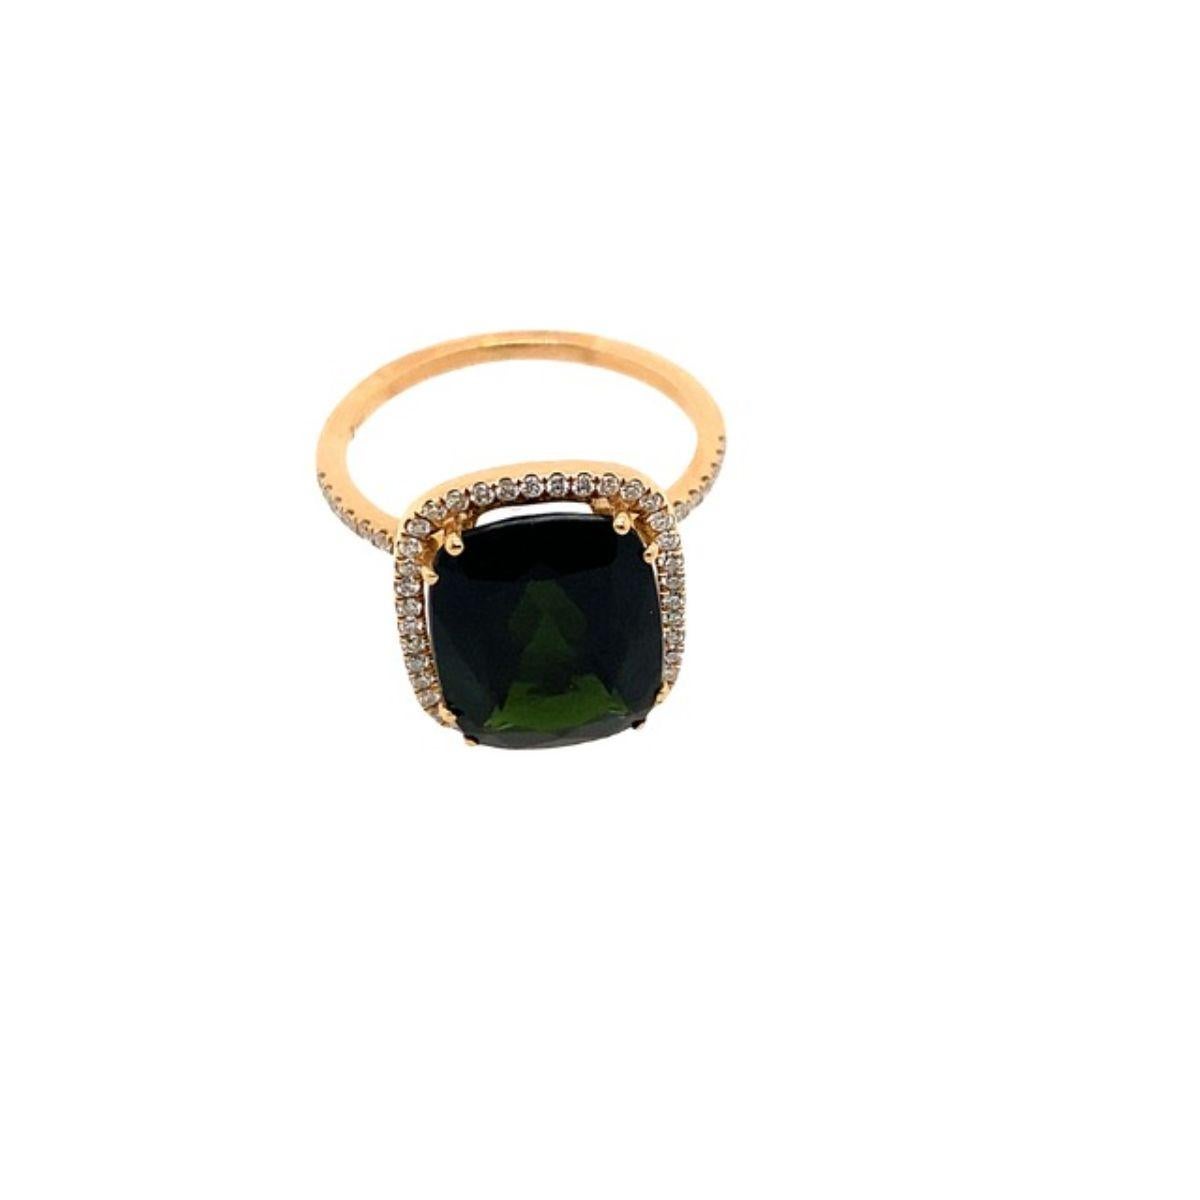 18ct Rose Gold Fine Quality 4.23ct Cushion Shape Green Tourmaline Ring

Additional Information:
Total Diamond Weight: 0.476ct
Diamond Colour: F
Diamond Clarity: VS
Green Tourmaline Weight: 4.23ct
Total Weight: 3.3g
Ring Size: J 1/2
Width of Band: